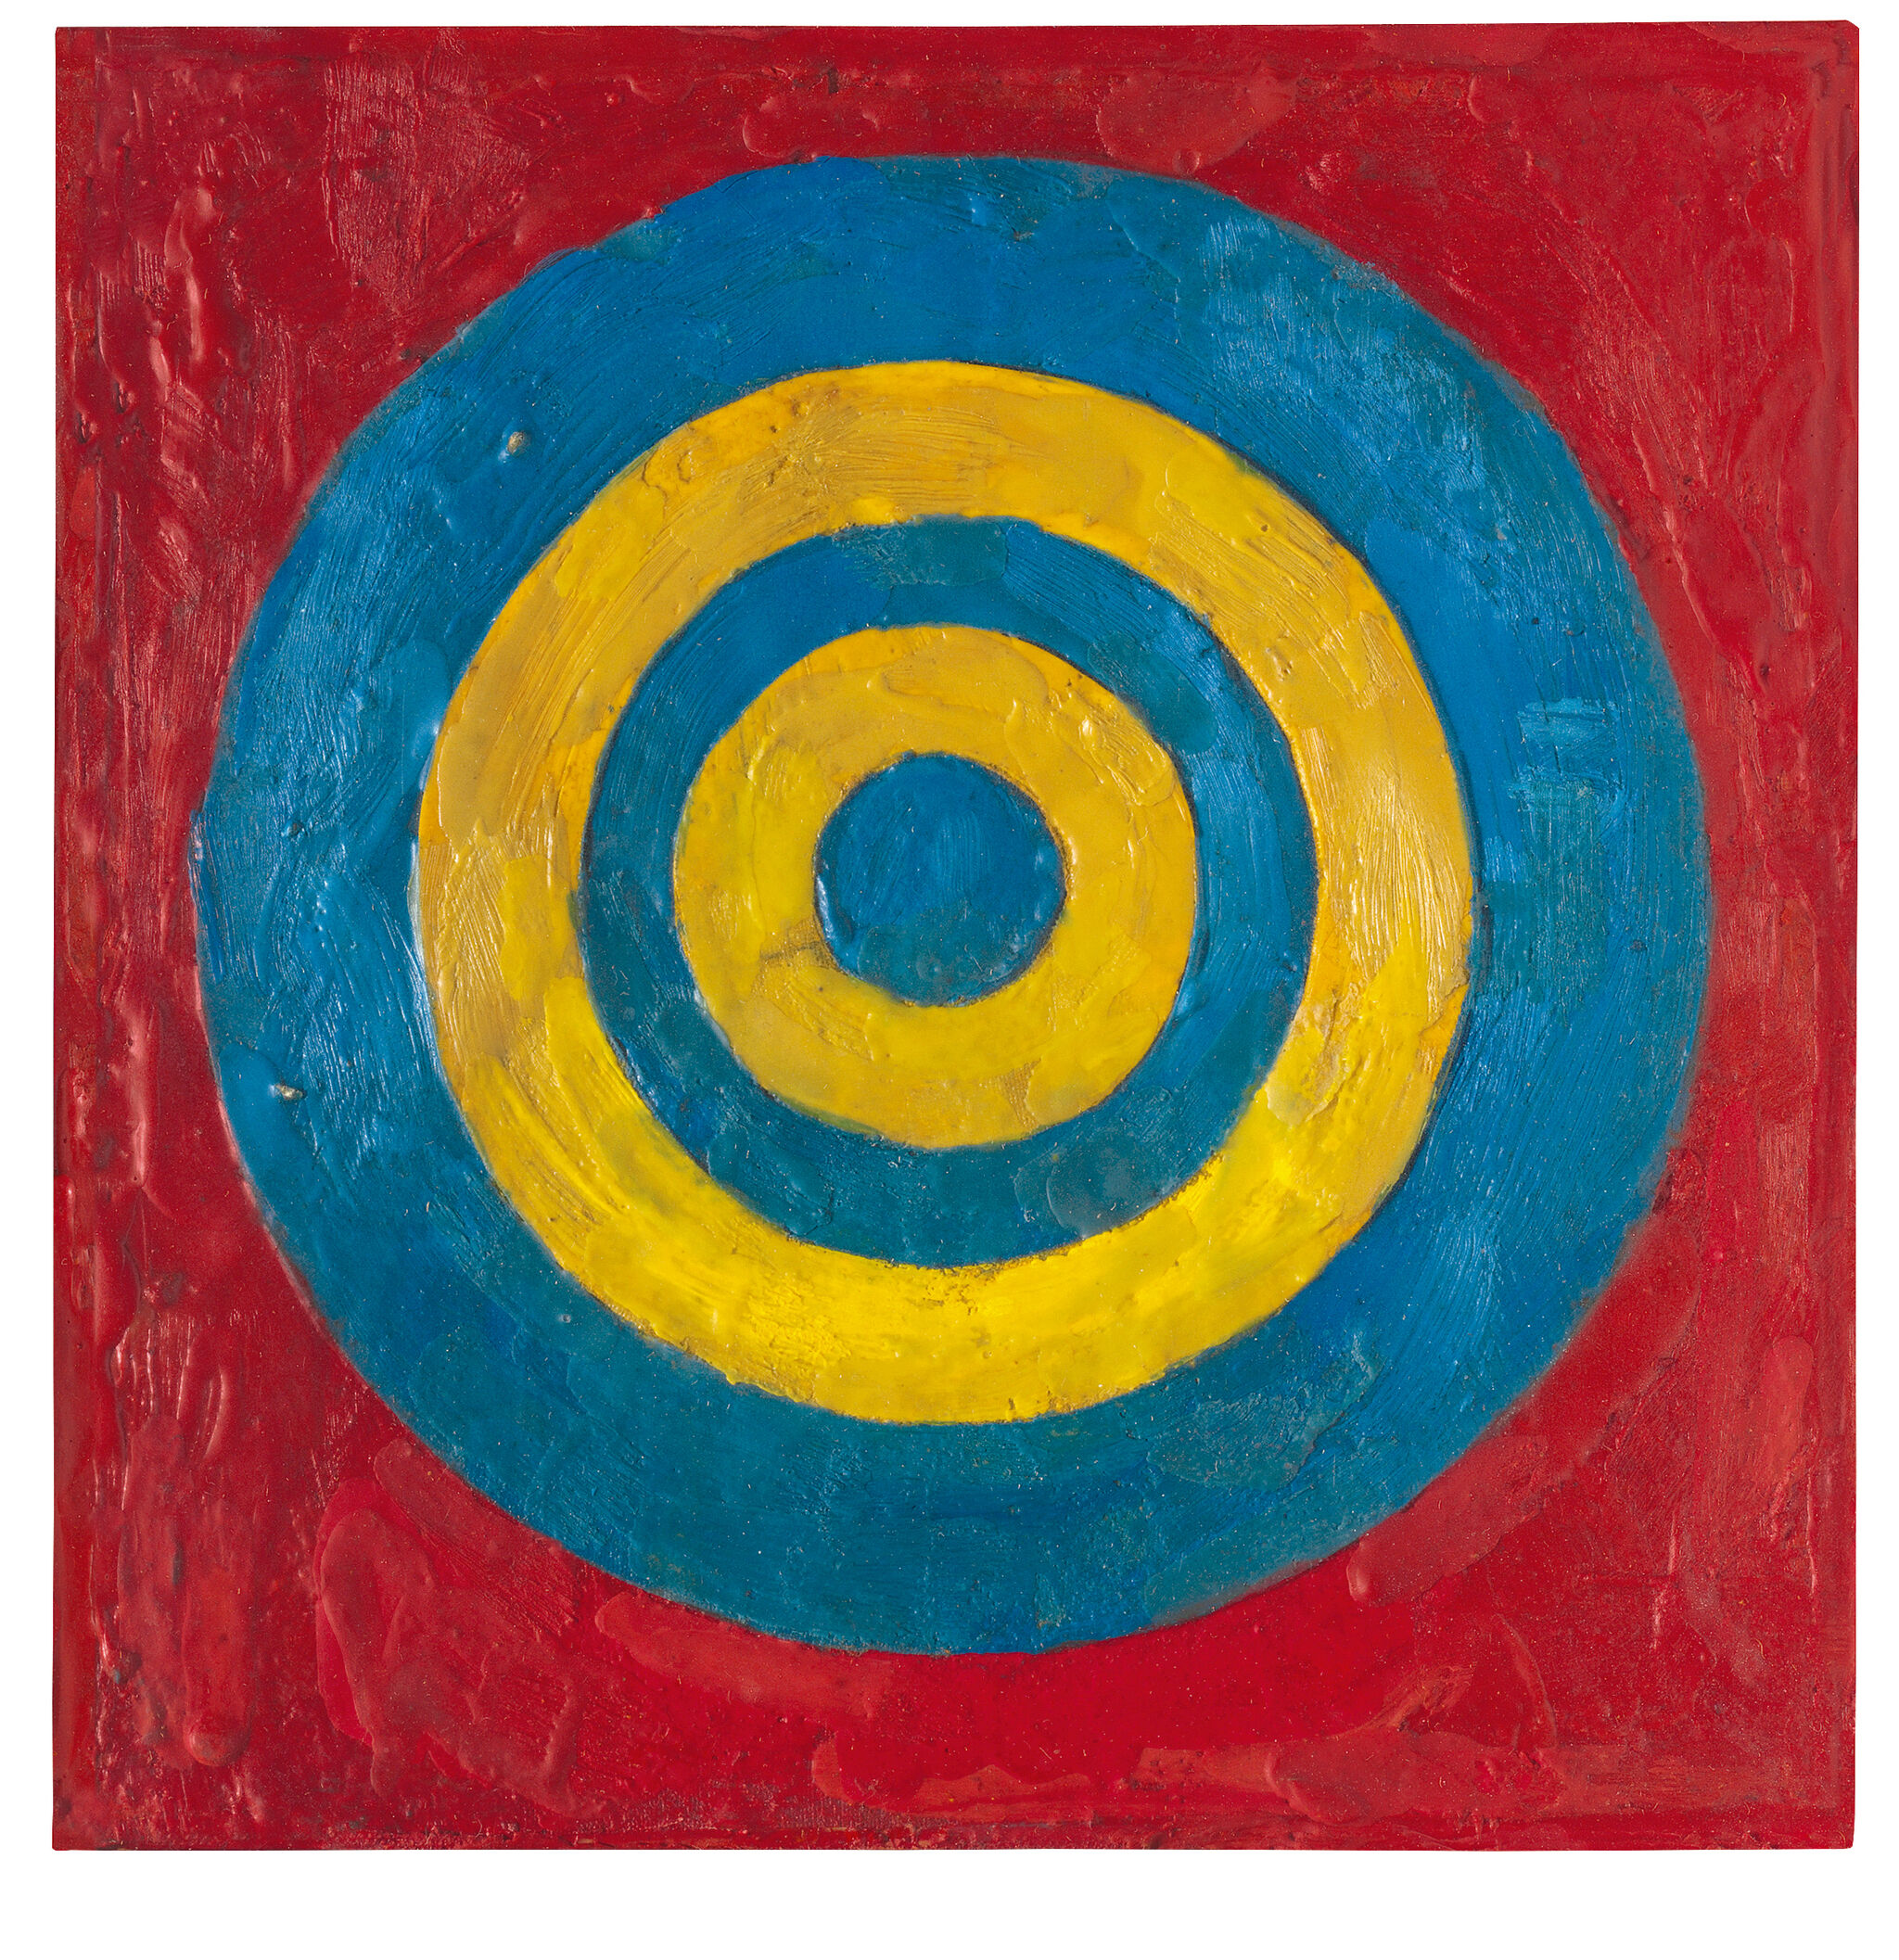 Blue-and-yellow target against red background.